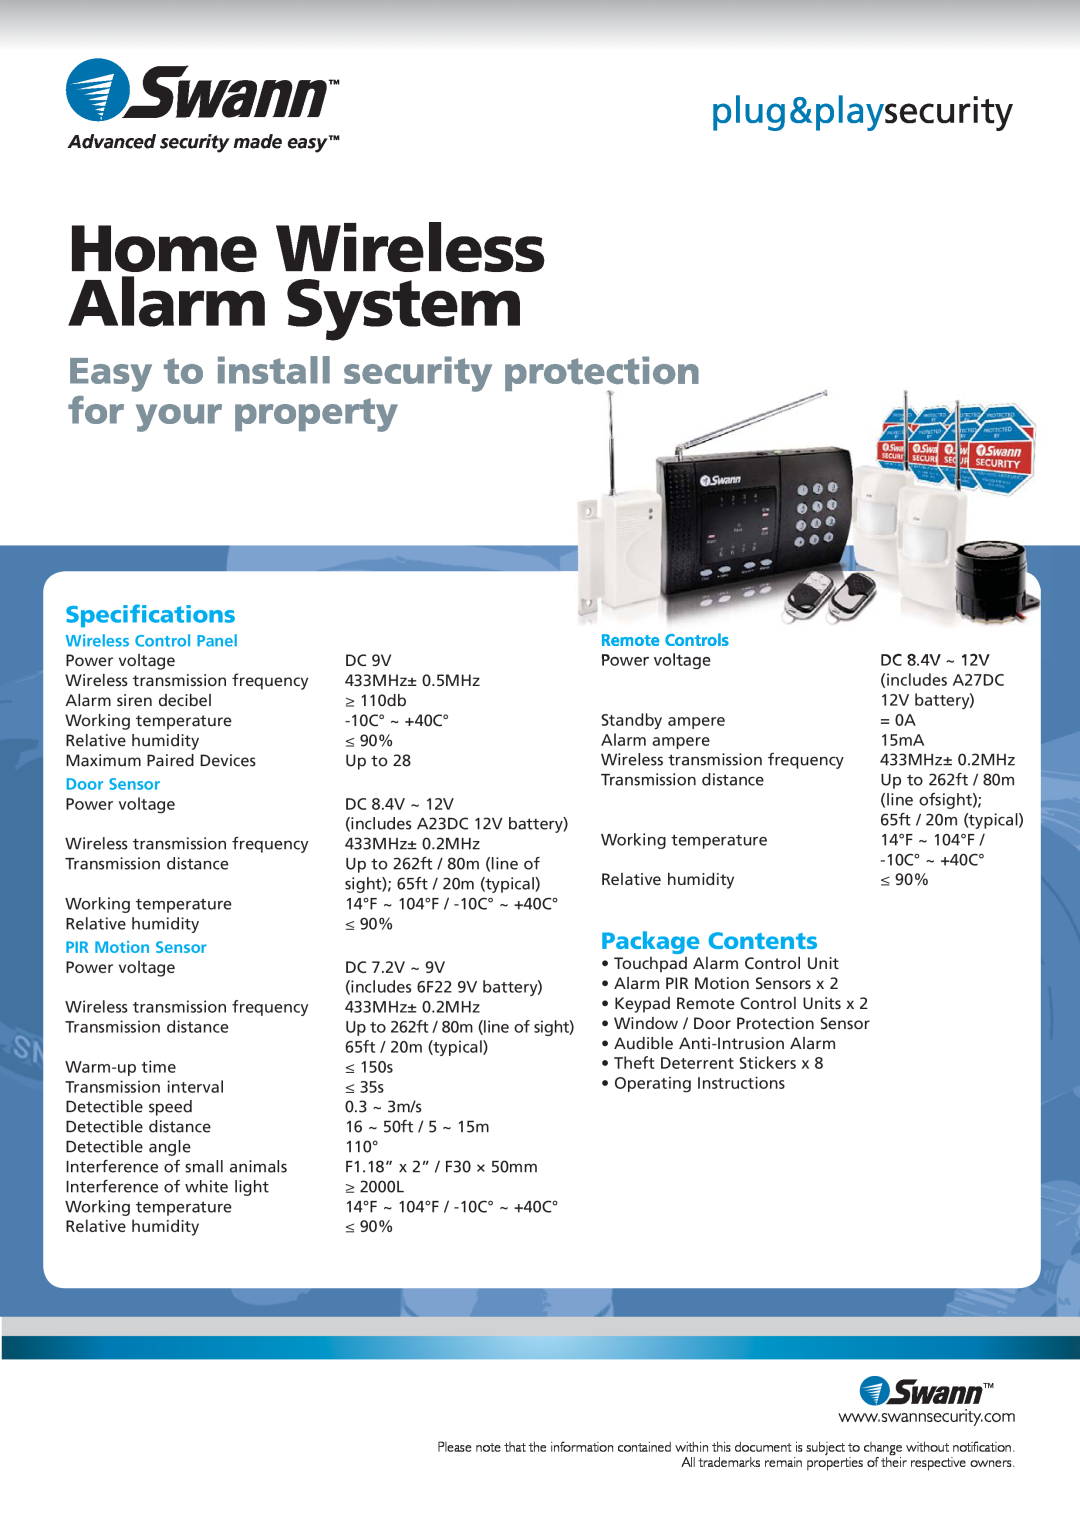 Swann SW347-WAK Home Wireless Alarm System, plug&playsecurity, Speciﬁcations, Package Contents, Wireless Control Panel 